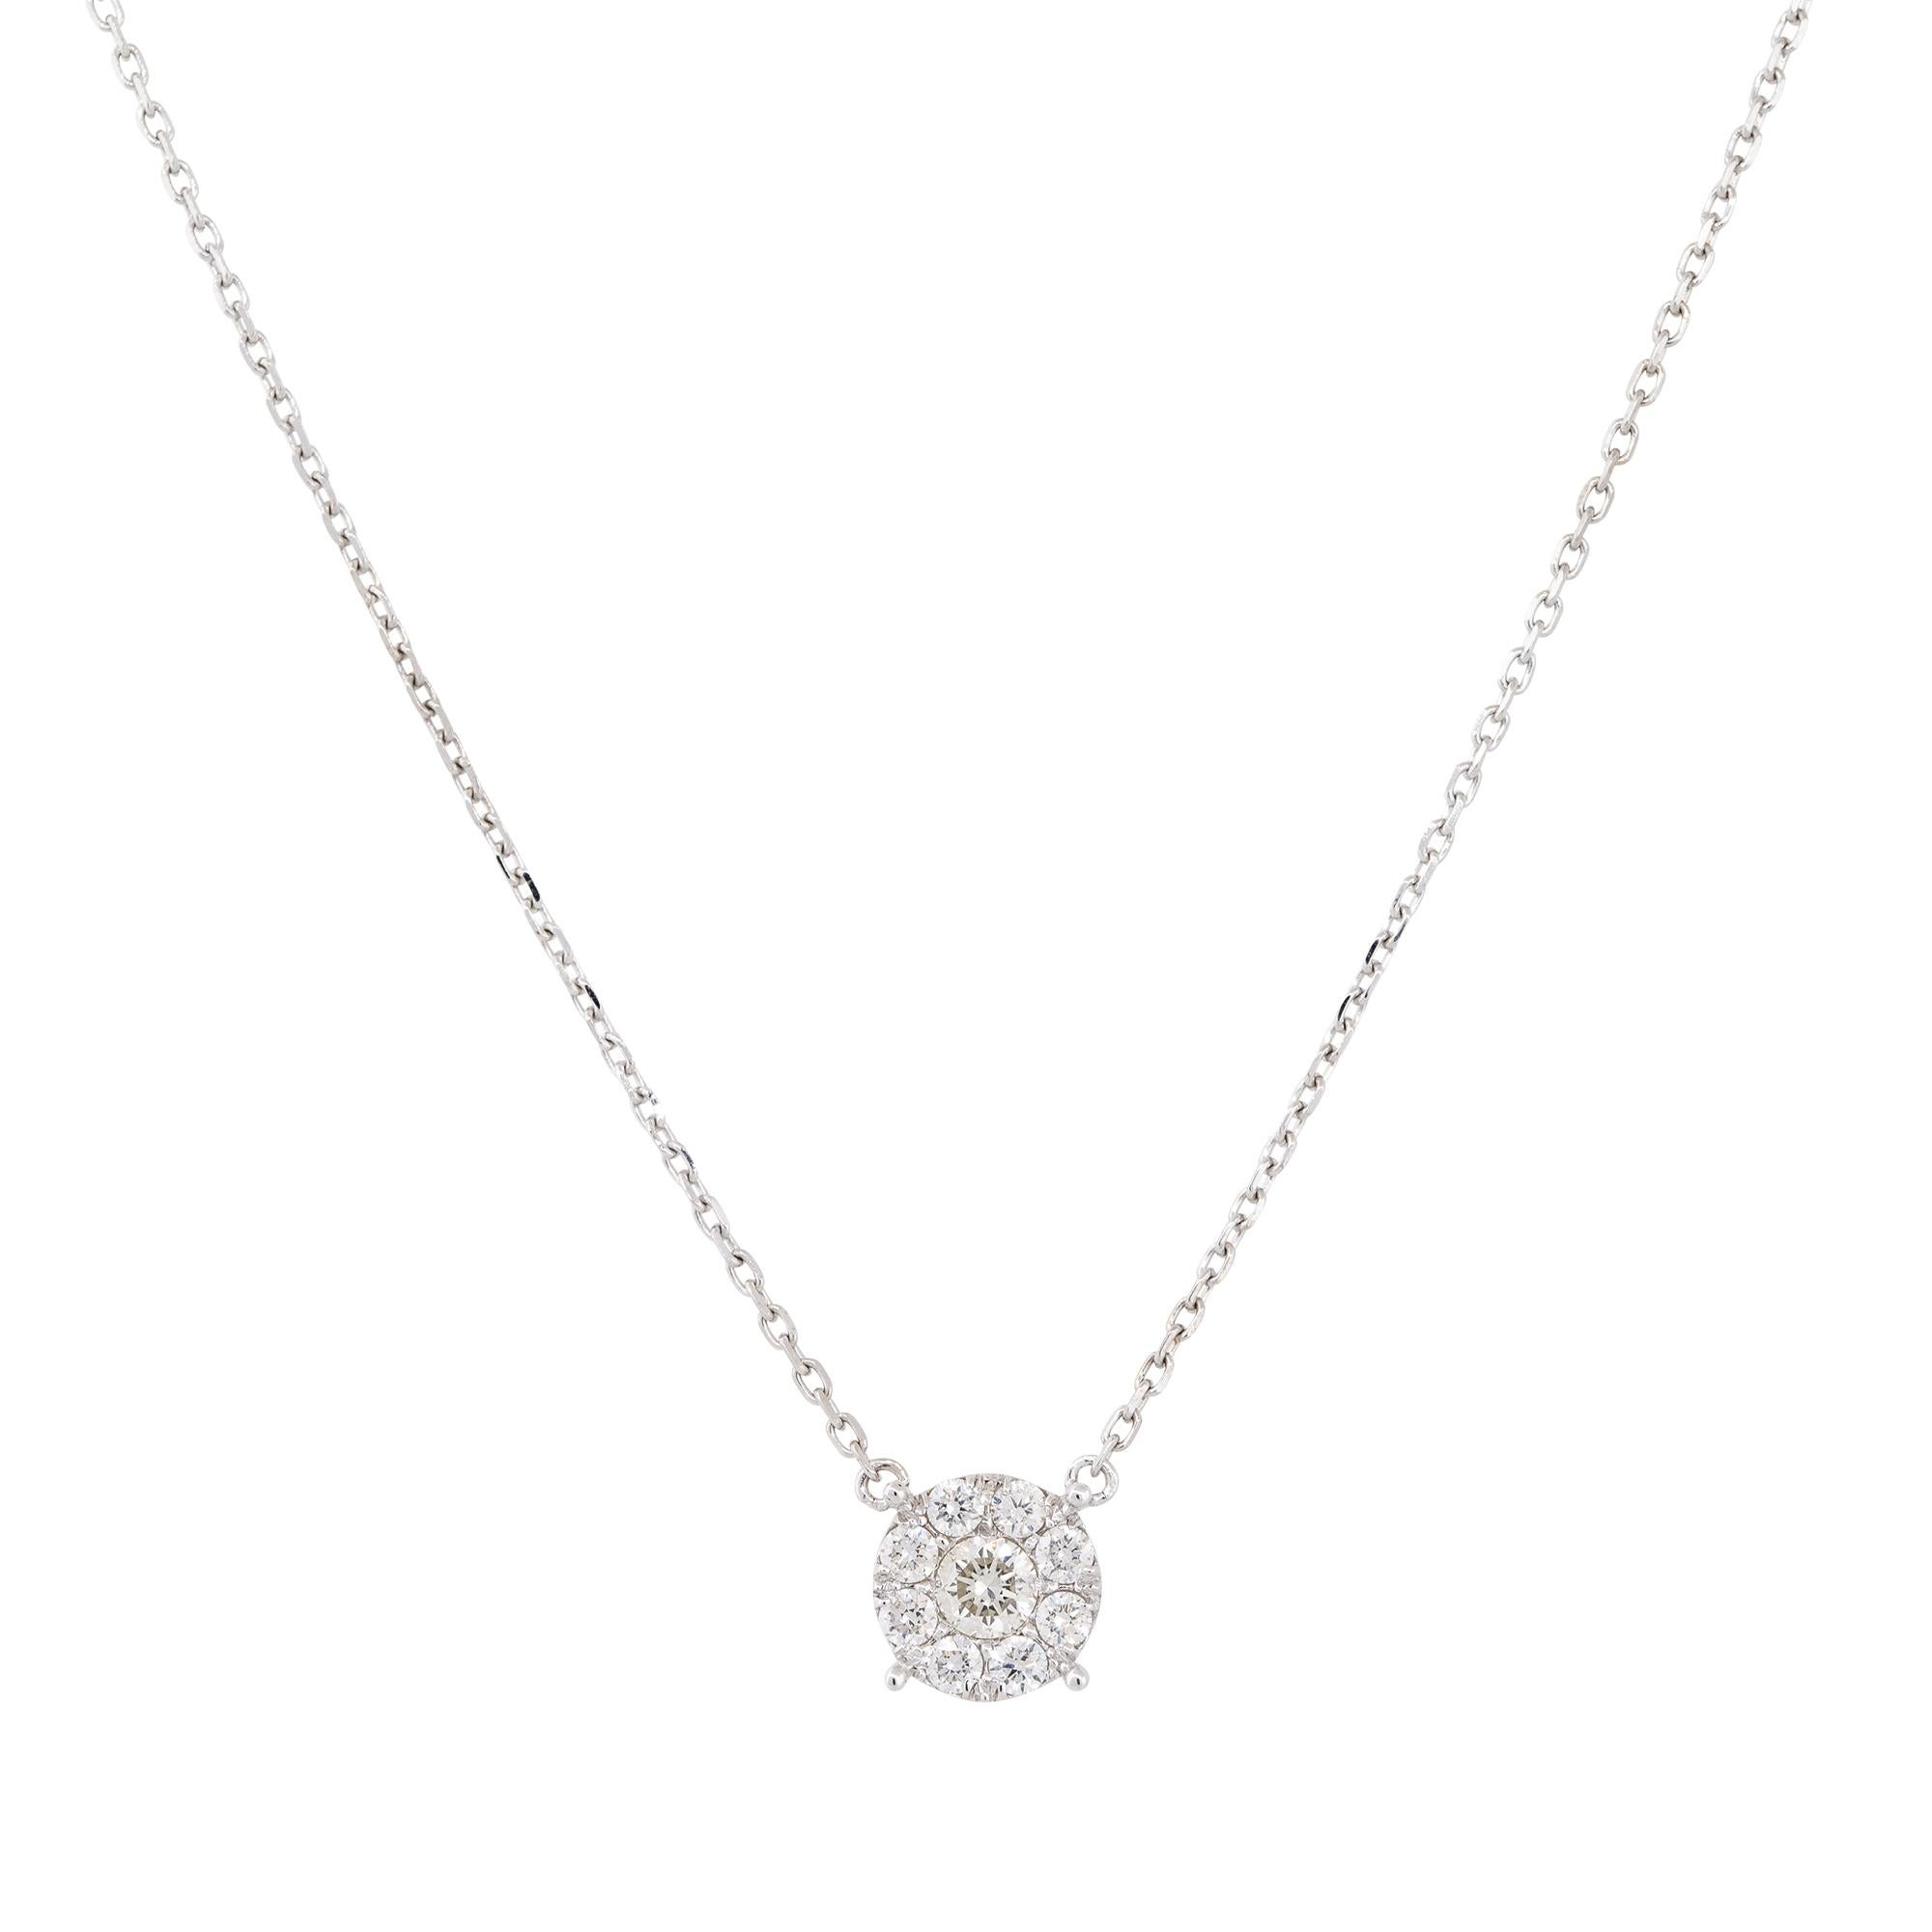 18k White Gold 0.64ctw Diamond Cluster Necklace

Material: 18k White Gold
Diamond Details: Approximately 0.64ctw of Round Cut Diamonds
Total Weight: 3.5g (2.3dwt)
Additional Details: This item comes with a presentation box!
SKU: G12911